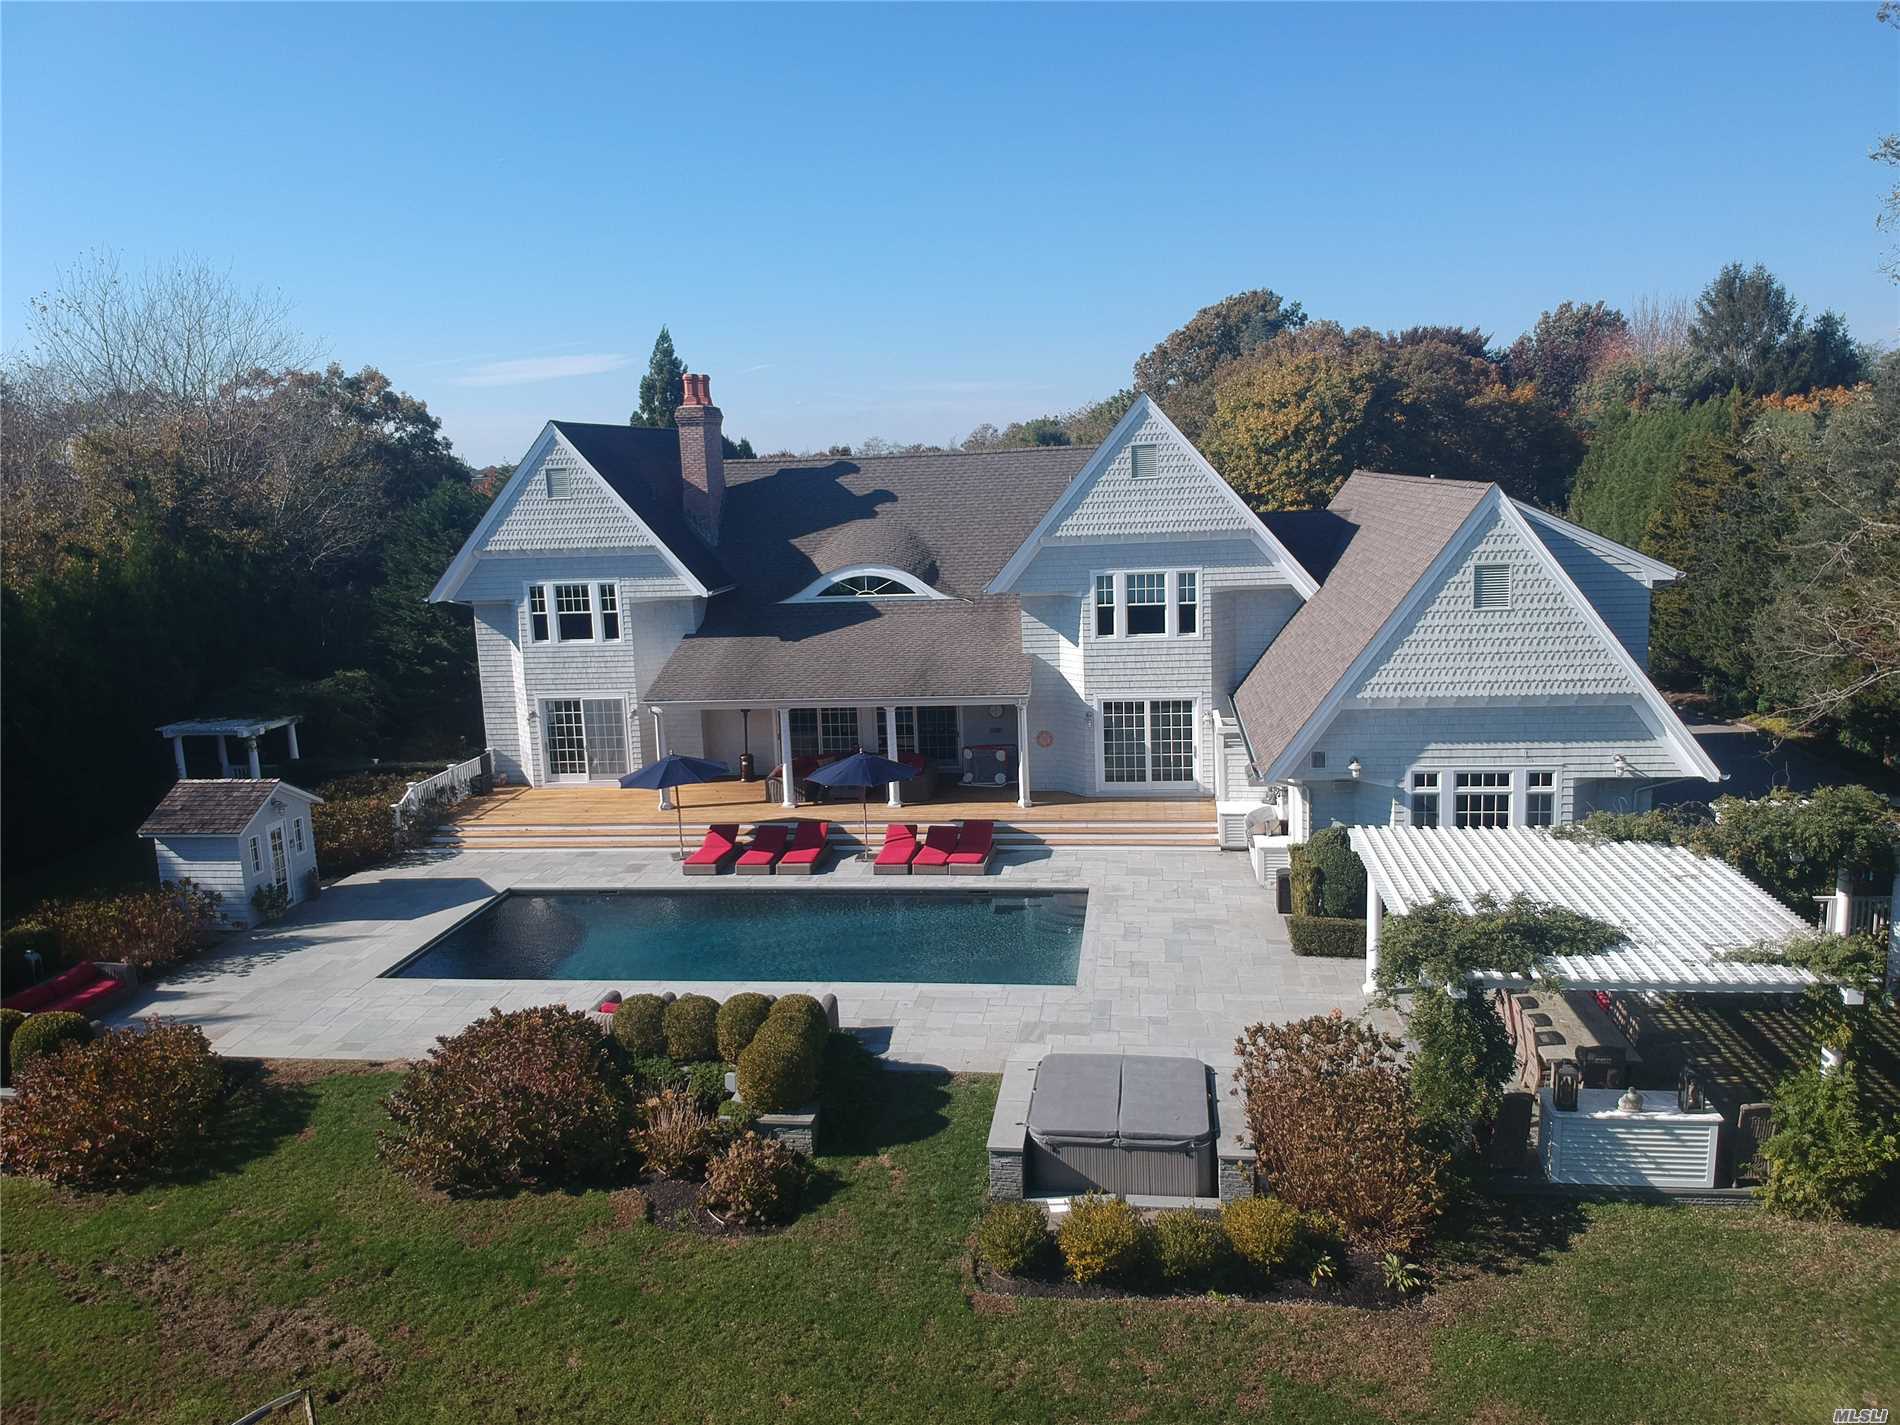 This 6500 Sq. Ft. Turn-Key Estate Offers All The Amenities For Fine Living. Set On 1.4 Manicured Acres W/Heated Gunite Pool, Hot-Tub & Sauna. Features Include Chef&rsquo;s Kitchen, Dr, Lr W/Fplc, Den, 5 Well Appointed En-Suite Bedrooms Plus Master Suite W/Fplc. Finished Guest Quarters Above The 3 Car Garage, Sound System Inside & Out, Full Generator, Plus Finished Basement W/Gym, Lr, Full Bath & Movie Theater. Too Much To List.